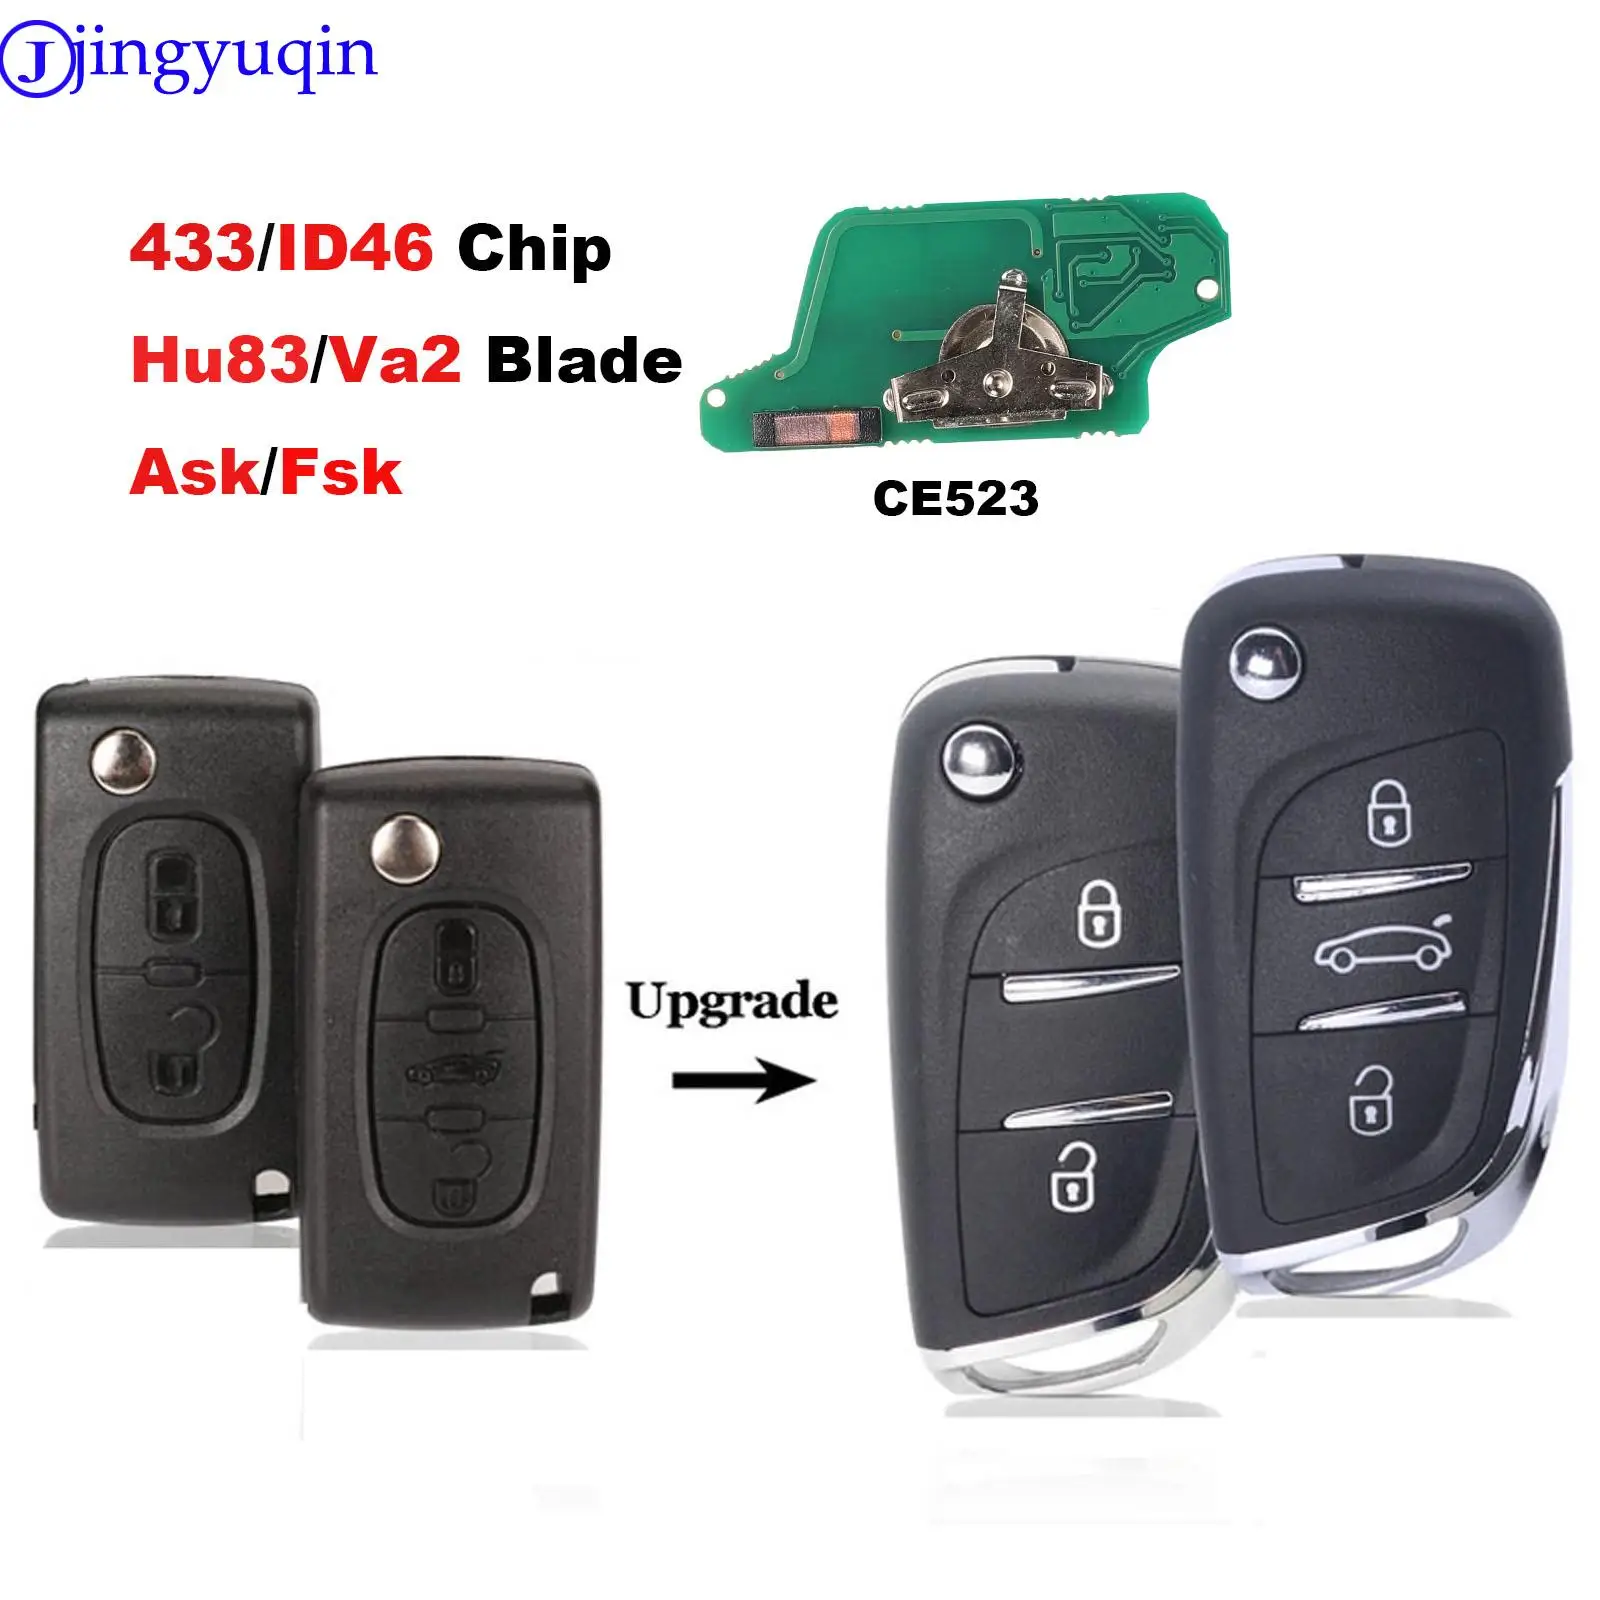 jingyuqin 10PS ASK/FSK 433MHz ID46 Chip CE0523 Modified Flip Remote Key For Peugeot 307 407 607 HU83/ VA2 Blade 2 3 Button Key